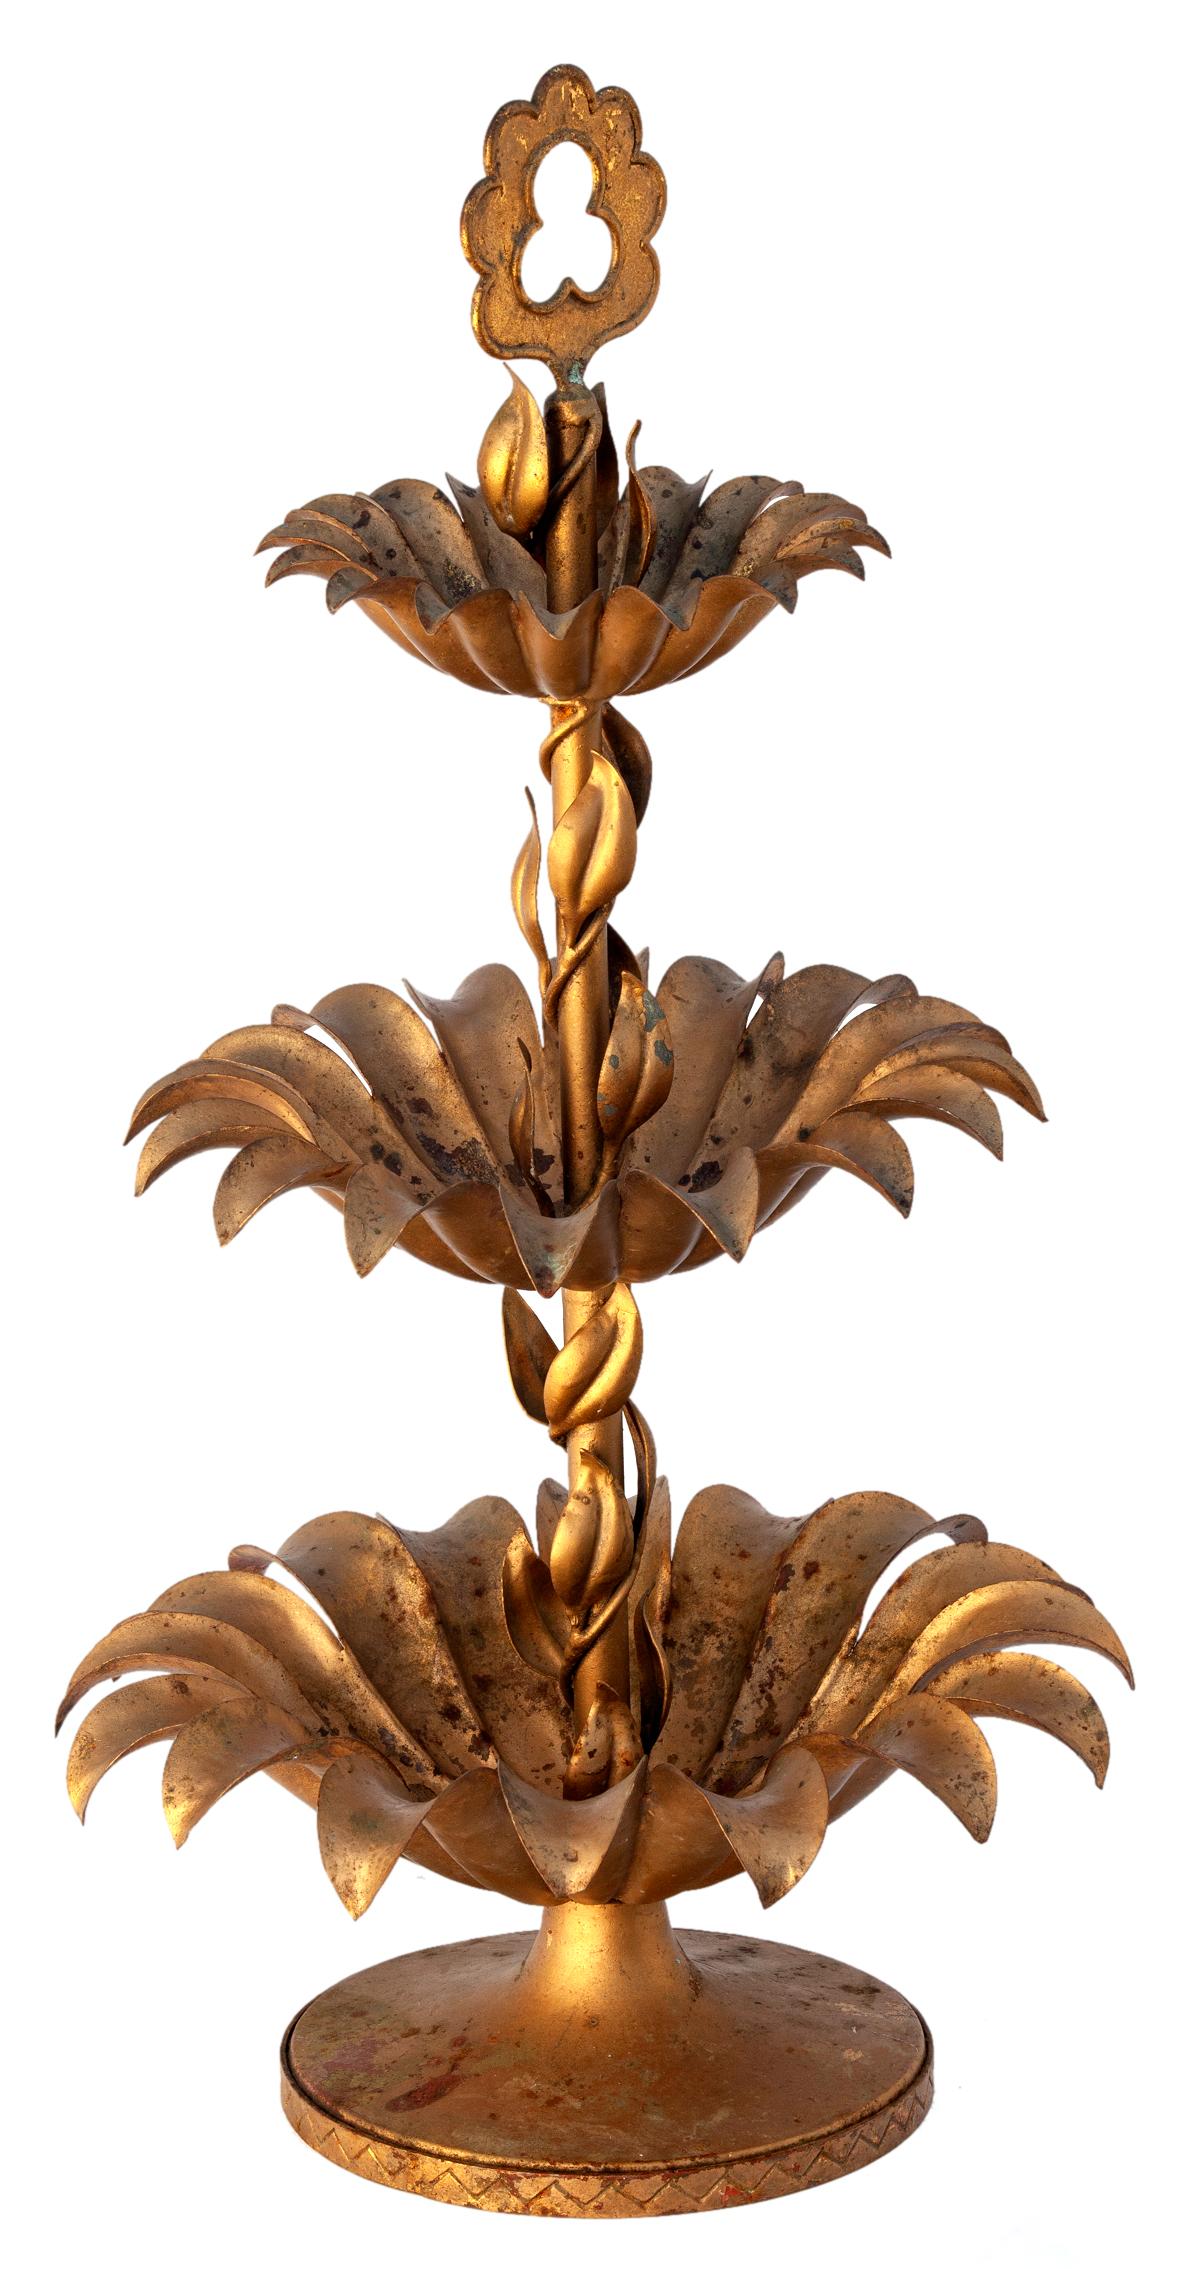 Hollywood Regency style gilt three tier stand. 
Fill with fruits, flowers, shells or whatever. 
A stunning piece on its alone with its own rich organic form.
The branch & leaves wraparound the stem with twisted rope wrapped in vines.
The three